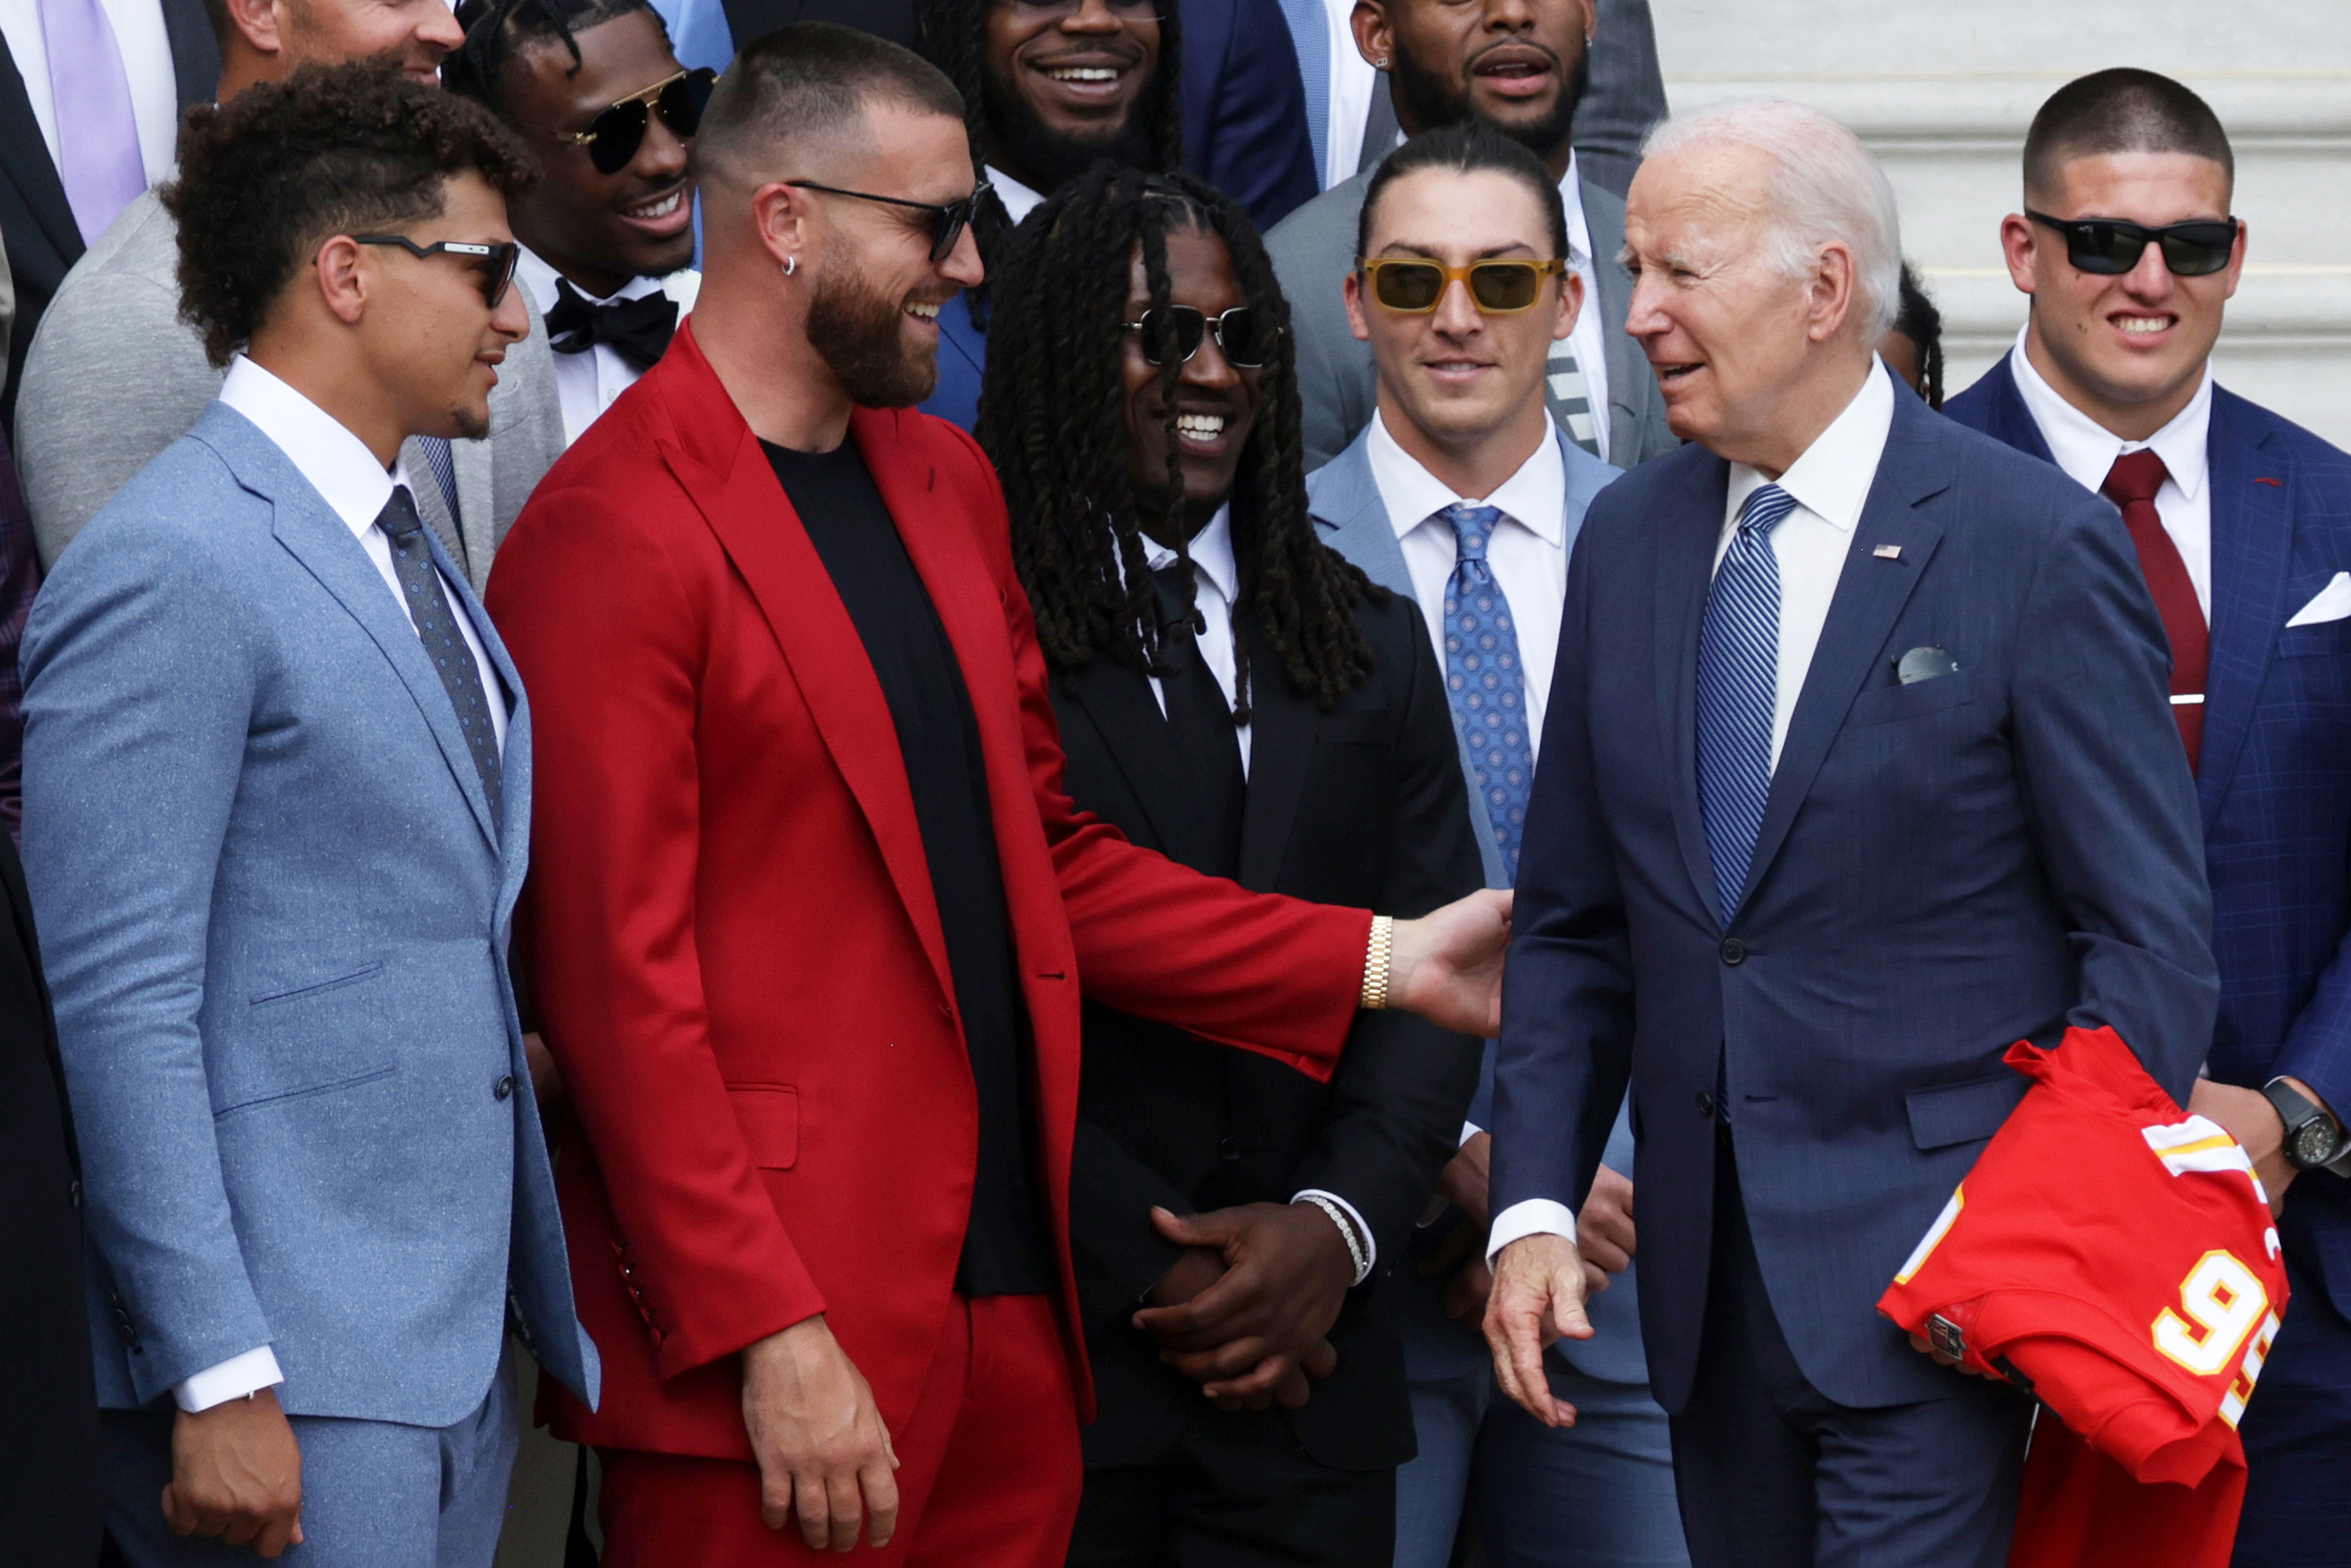 Biden with Travis and the rest of the team